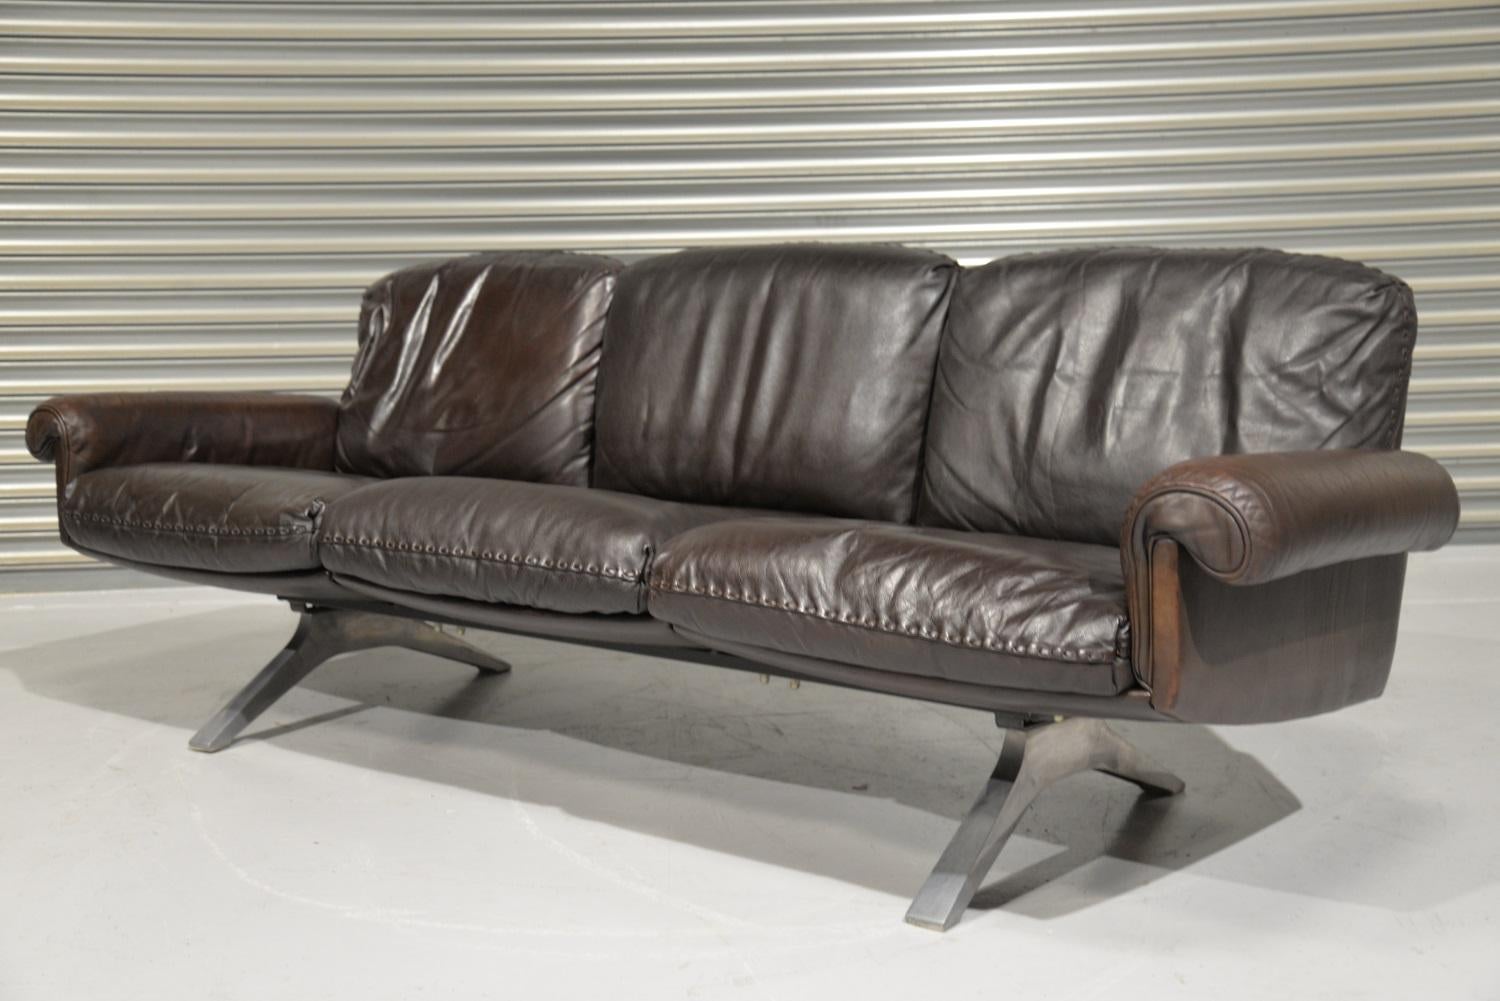 We are delighted to bring to you a vintage 1970s De Sede DS 31 three-seat sofa in dark chocolate brown aniline leather with superb whipstitch edge detail. The vintage sofa was hand built in Switzerland by de Sede craftsman circa 1970s. The iconic